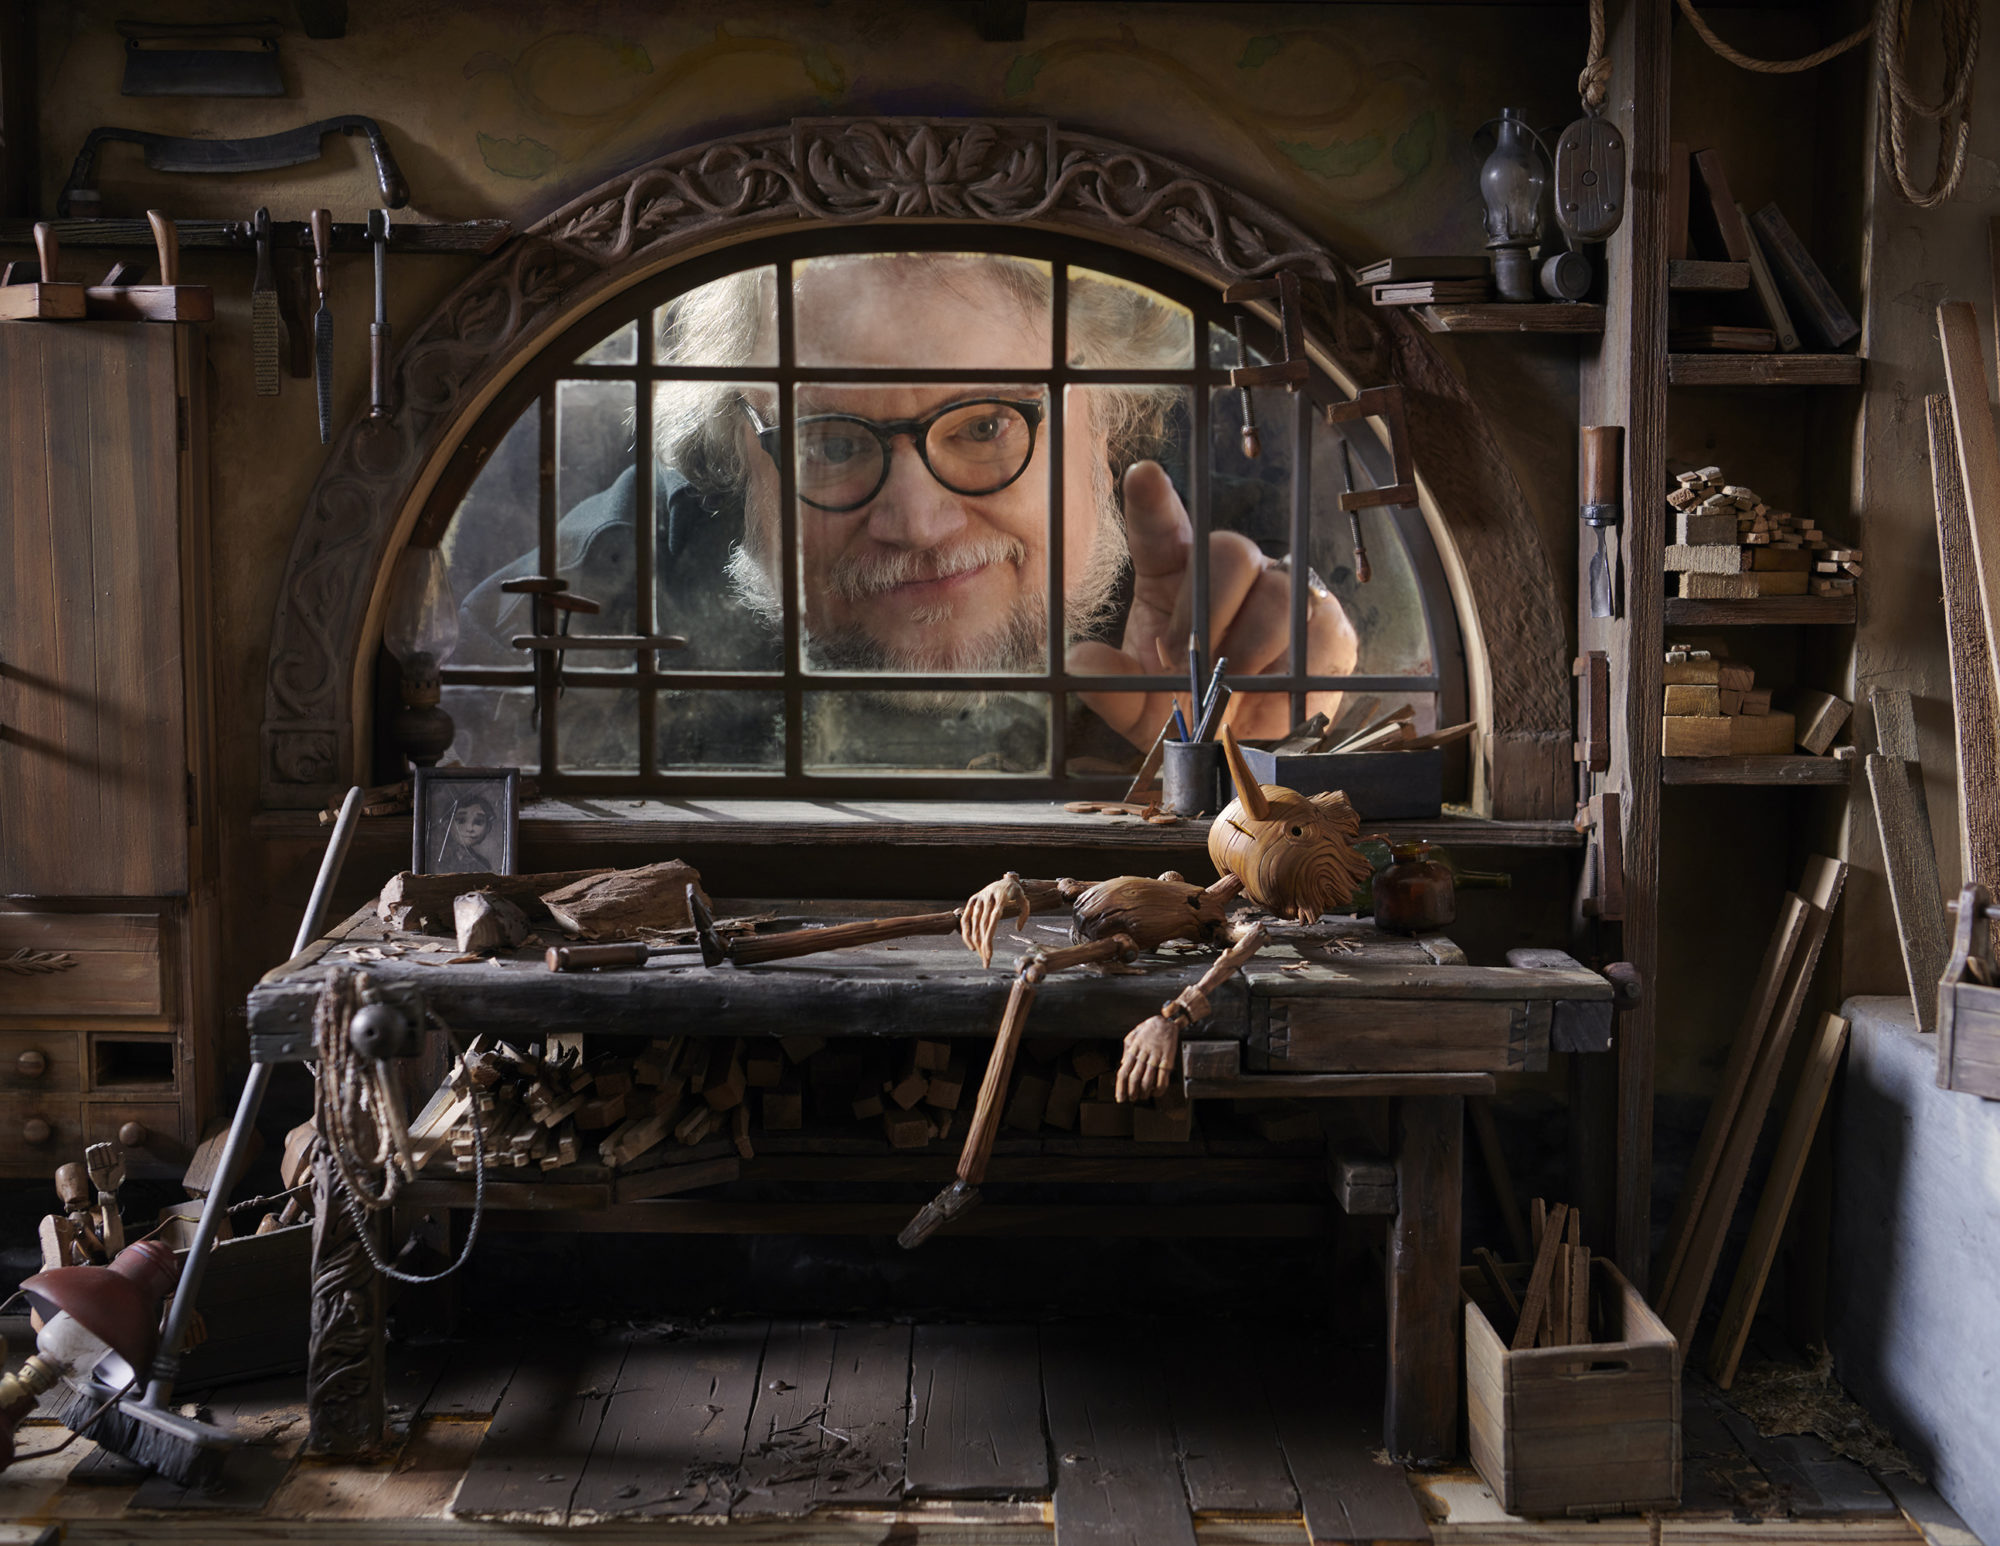 Man with beard and glasses peering into the set of a miniature claymation Pinocchio